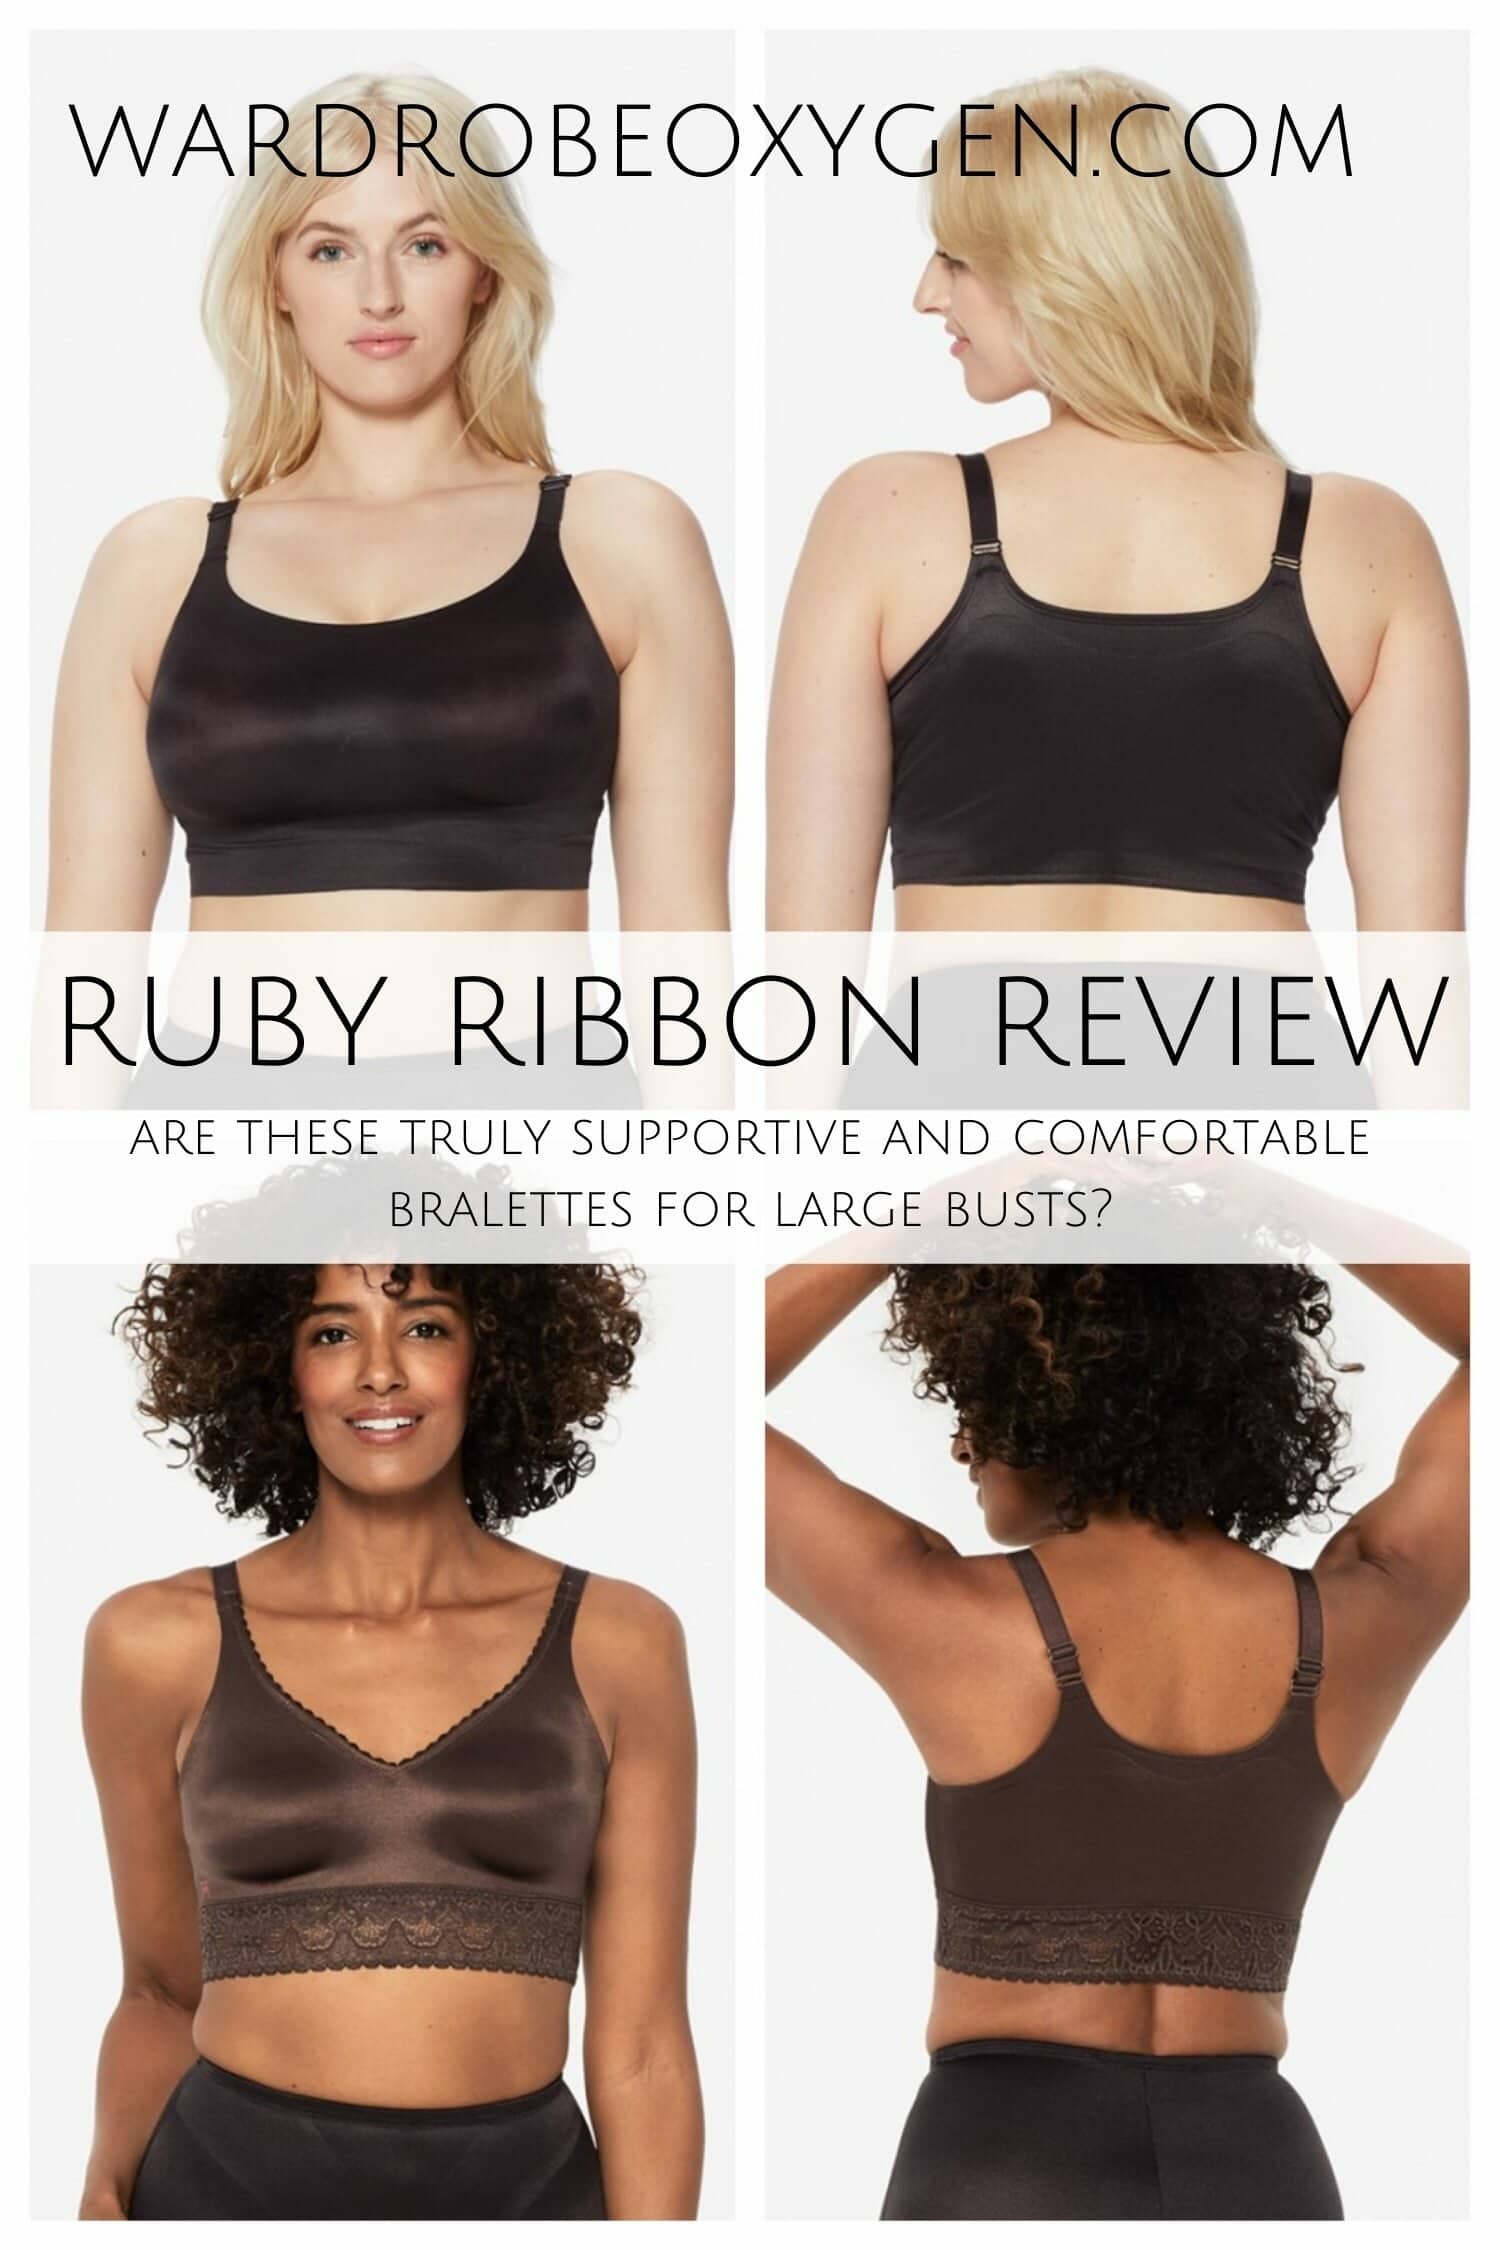 Honest Ruby Ribbon Review for Large Busts - Wardrobe Oxygen